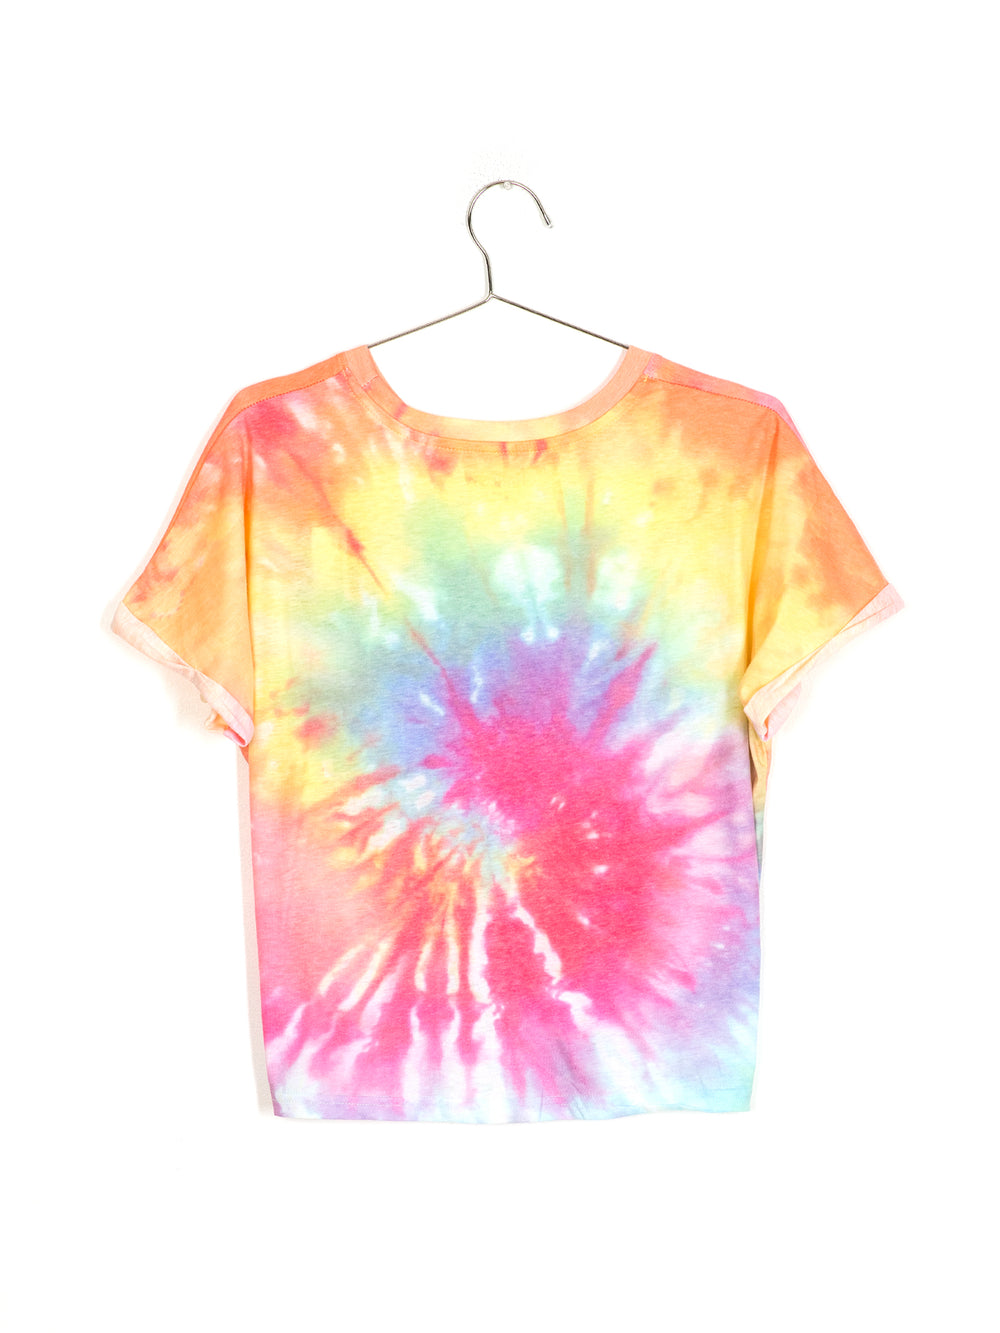 HARLOW LAYLA KNOTTED TIE DYE TEE - CLEARANCE